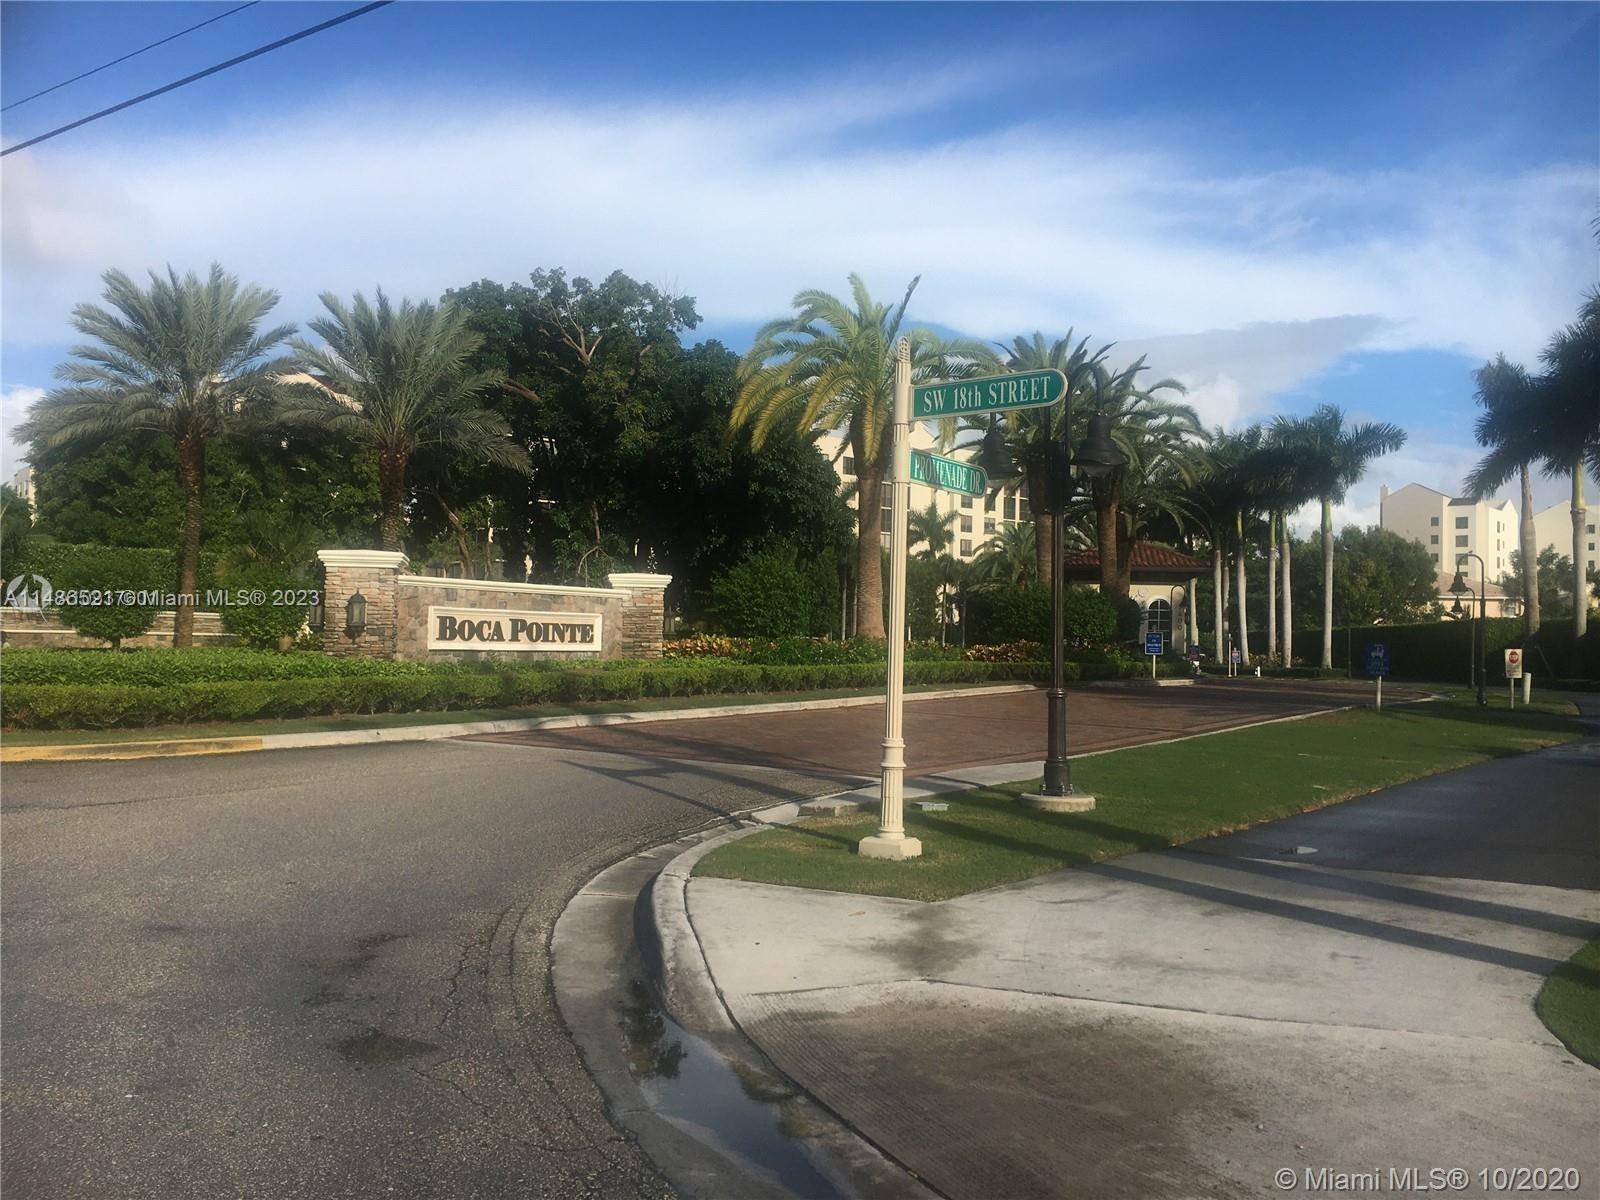 Looking for a single family home in the gated Boca Pointe community where no membership is required ?